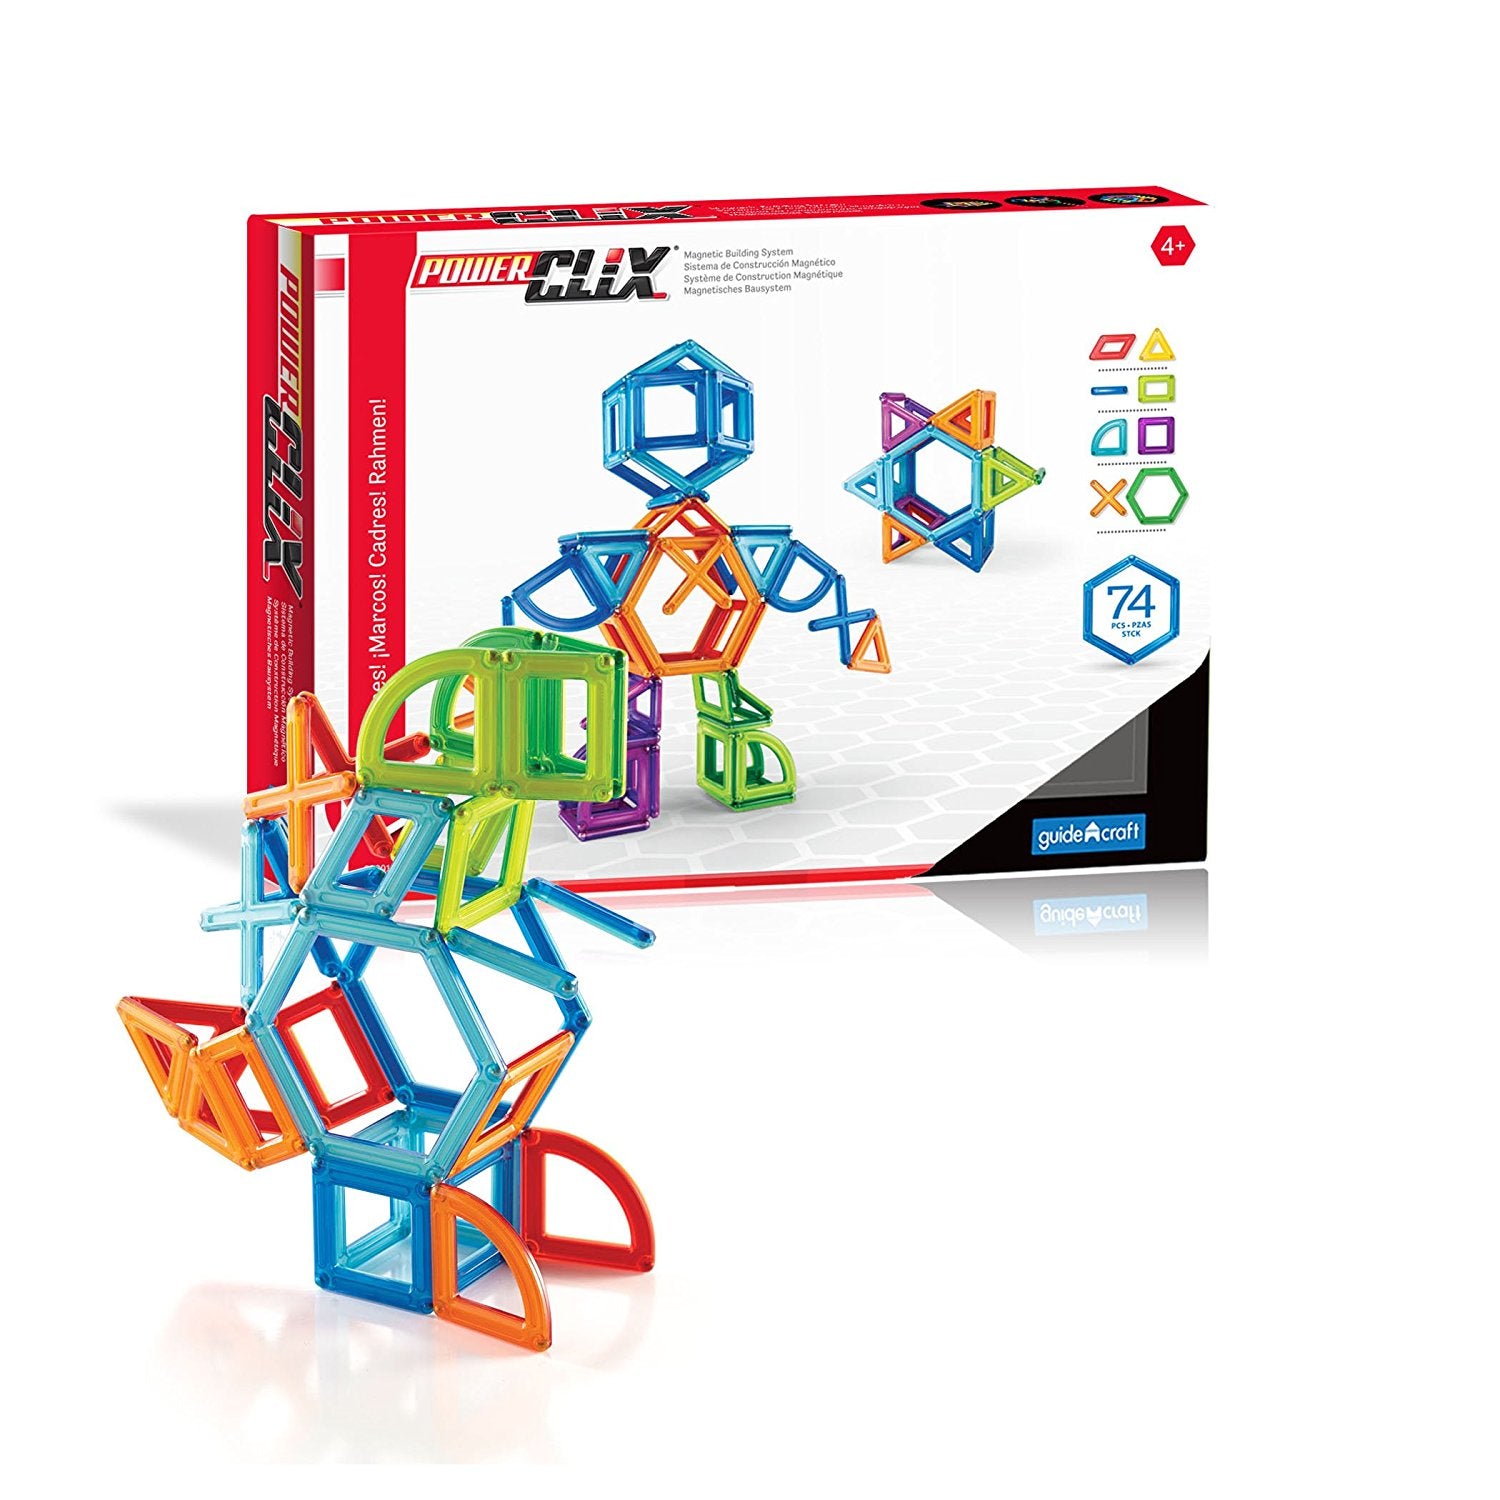 Guidecraft G9201 Powerclix Frames Magnetic Building Toys 74 Pc. Set